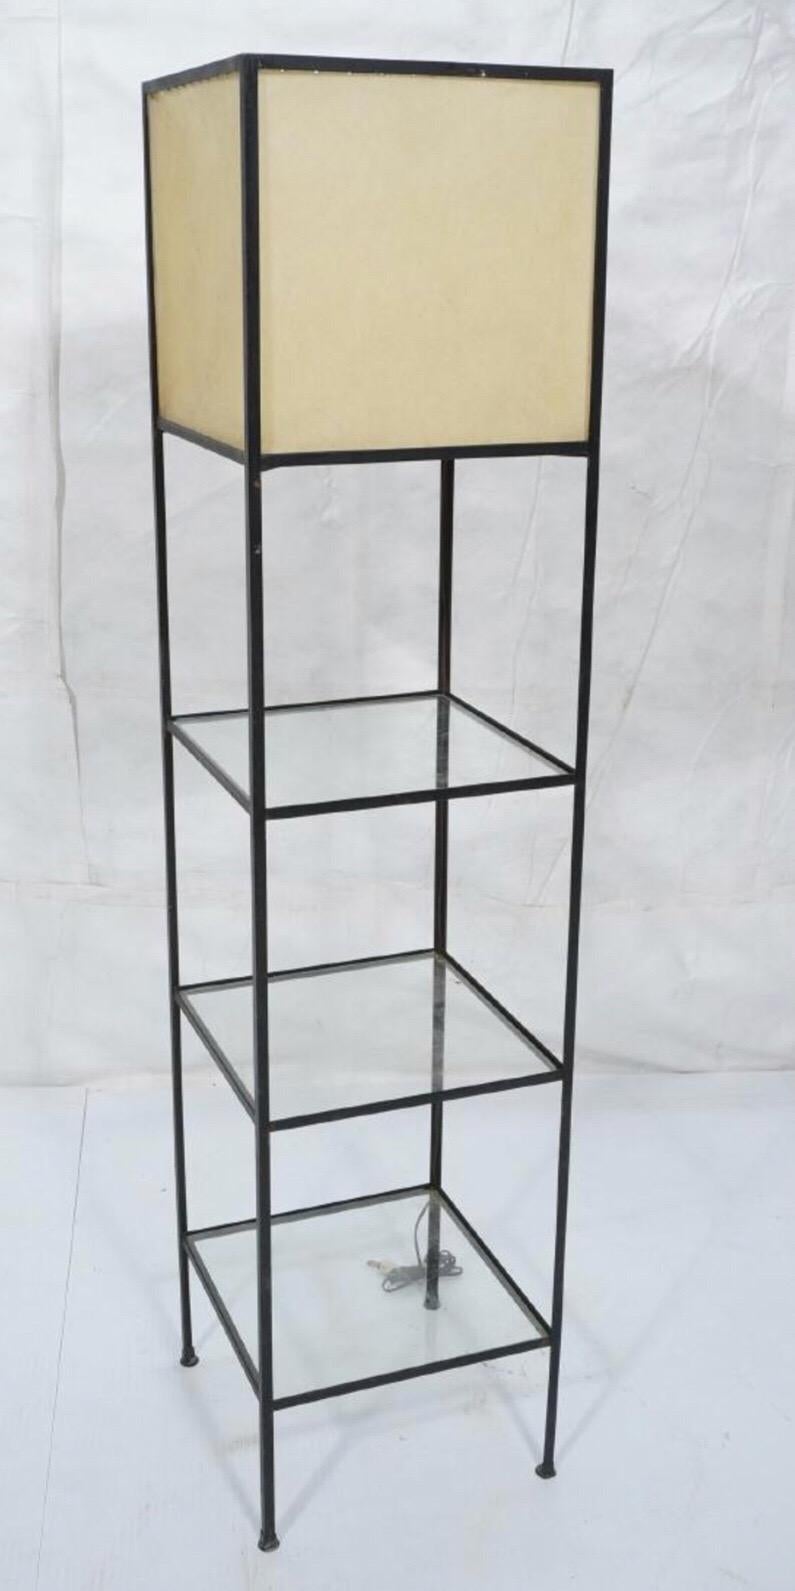 Modern iron floor lamp by Frederick Weinberg. Normal wear to metal as glass as photographed. Three-glass shelves with original shade at top.